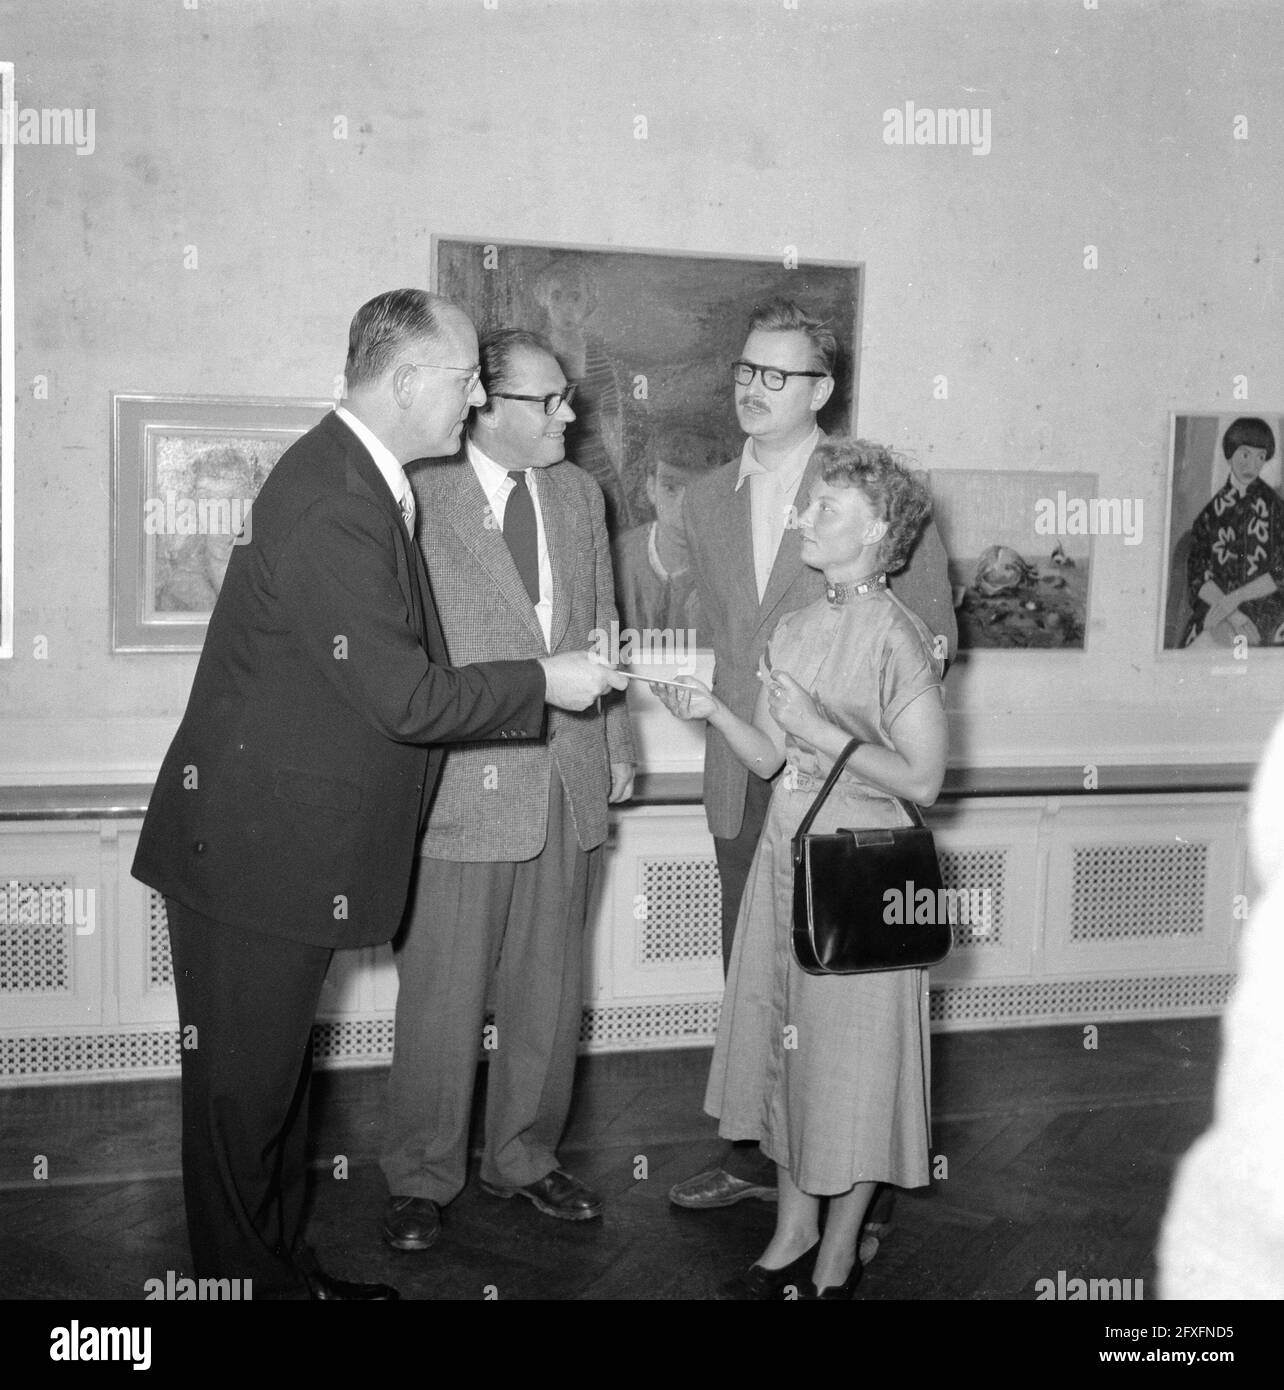 Presentation J. Maris Prize The Hague, Co Westerik, Mayor Schokking, W. Hussen, Jeny Dalenoord, July 30, 1955, Presentations, The Netherlands, 20th century press agency photo, news to remember, documentary, historic photography 1945-1990, visual stories, human history of the Twentieth Century, capturing moments in time Stock Photo